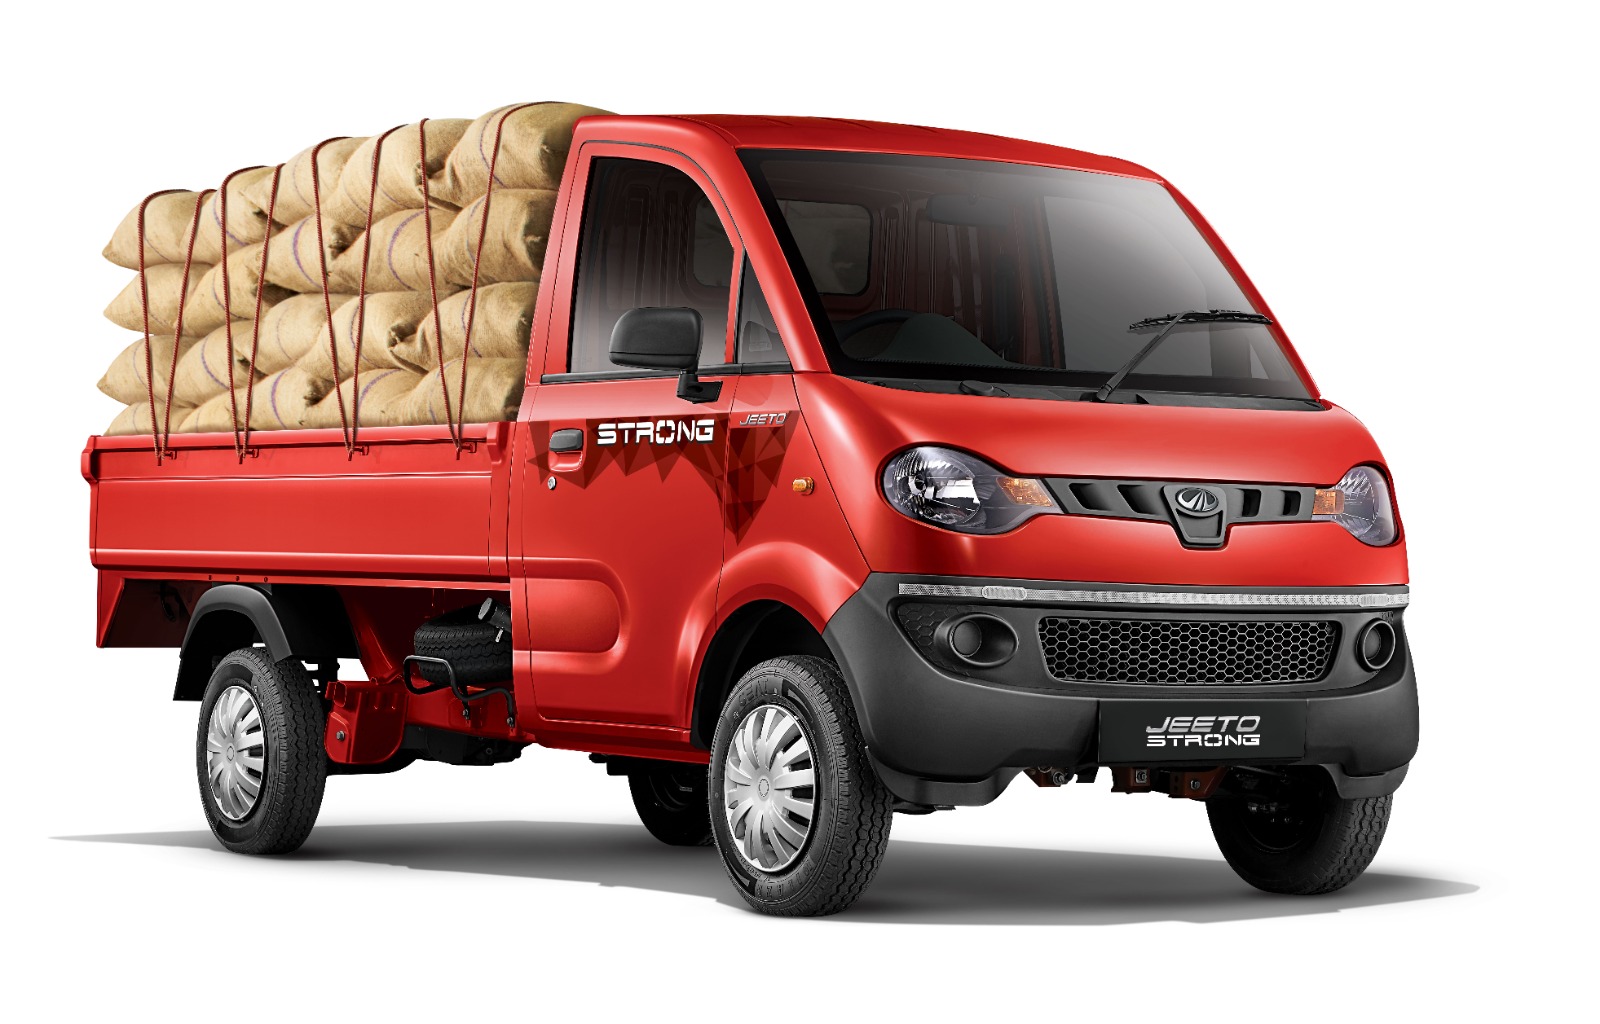 Jeeto Strong is a successor to the Jeeto Plus (diesel & CNG) with 100 kg additional payload 